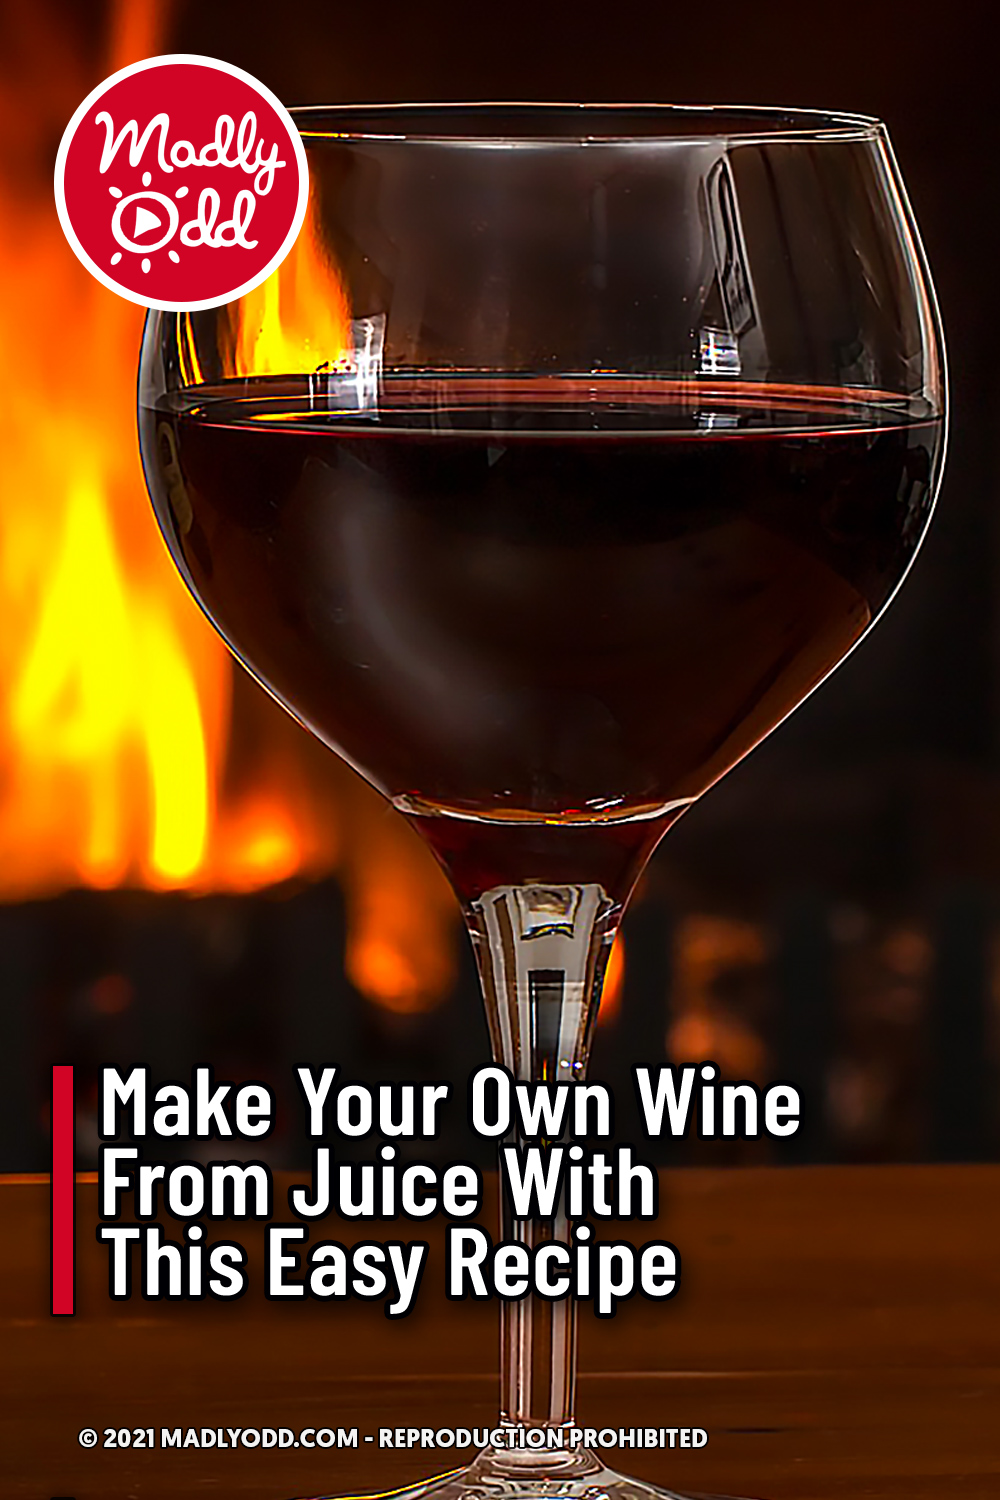 Make Your Own Wine From Juice With This Easy Recipe